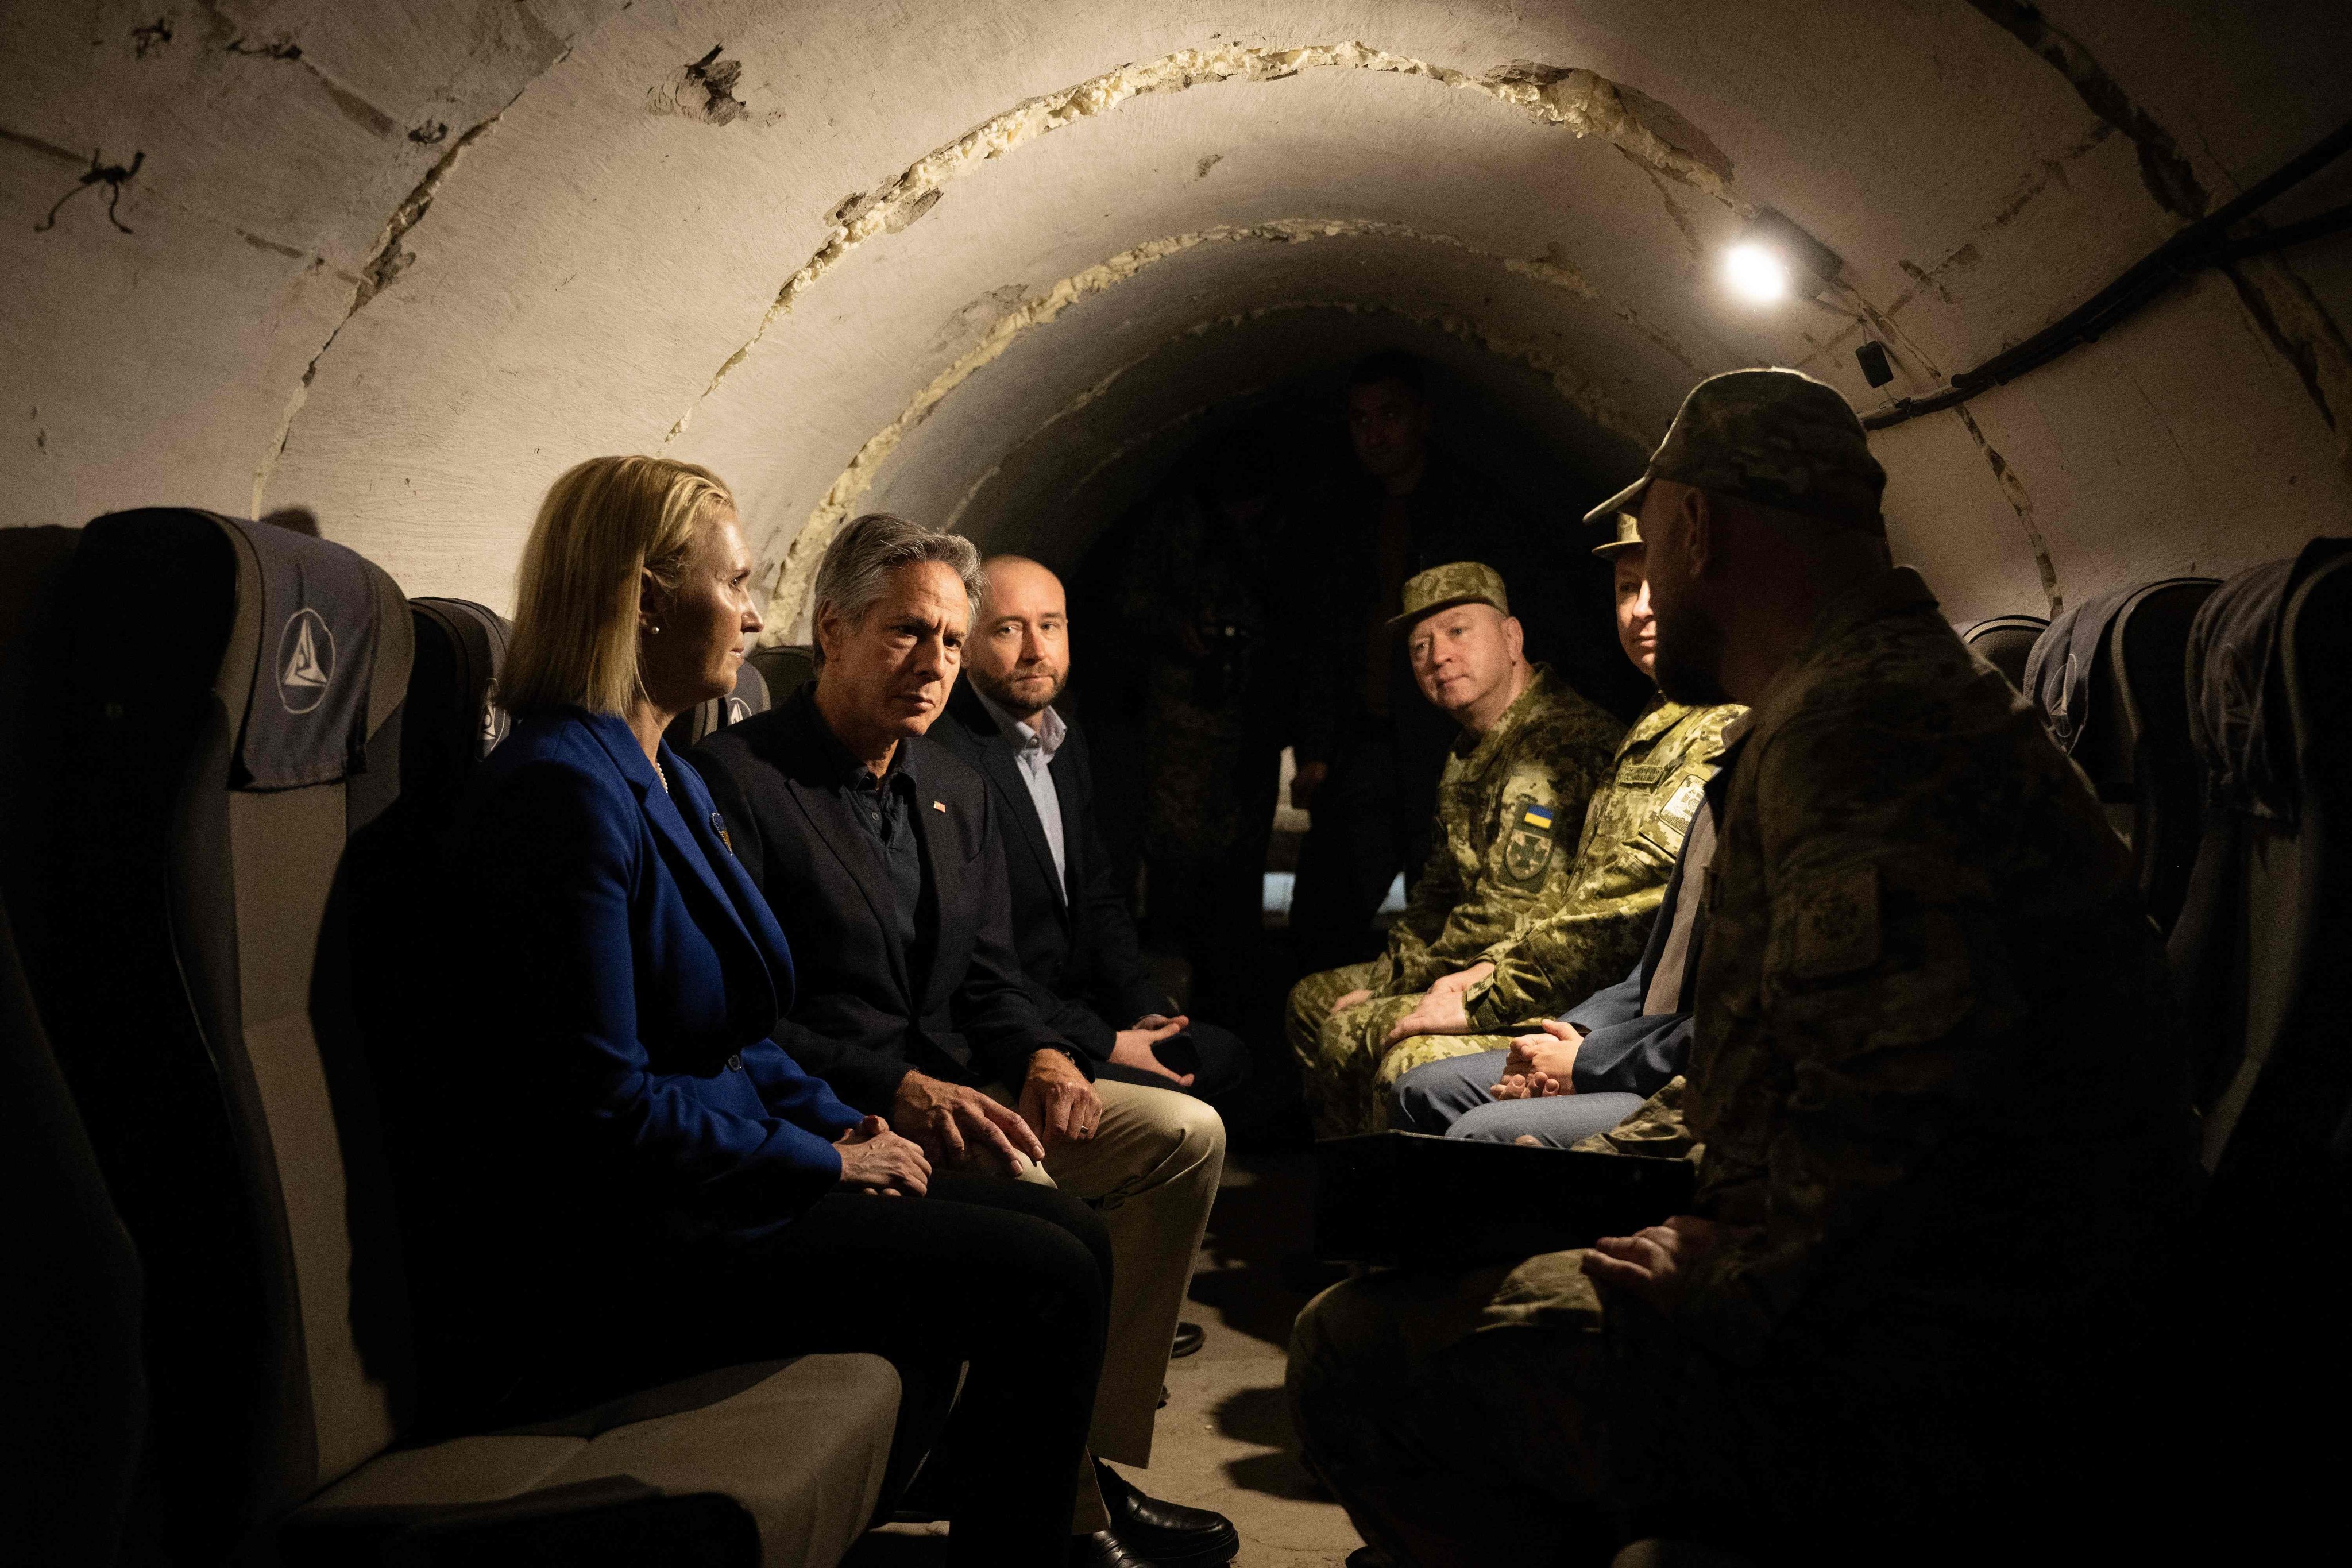 US Secretary of State Antony Blinken tours a bunker at a Ukrainian border guard site on the outskirts of Kyiv, Ukraine, on September 7. The conflict can still be reversed, provided both sides seize windows of opportunity to de-escalate and move from military action back to diplomacy. Photo: AFP 